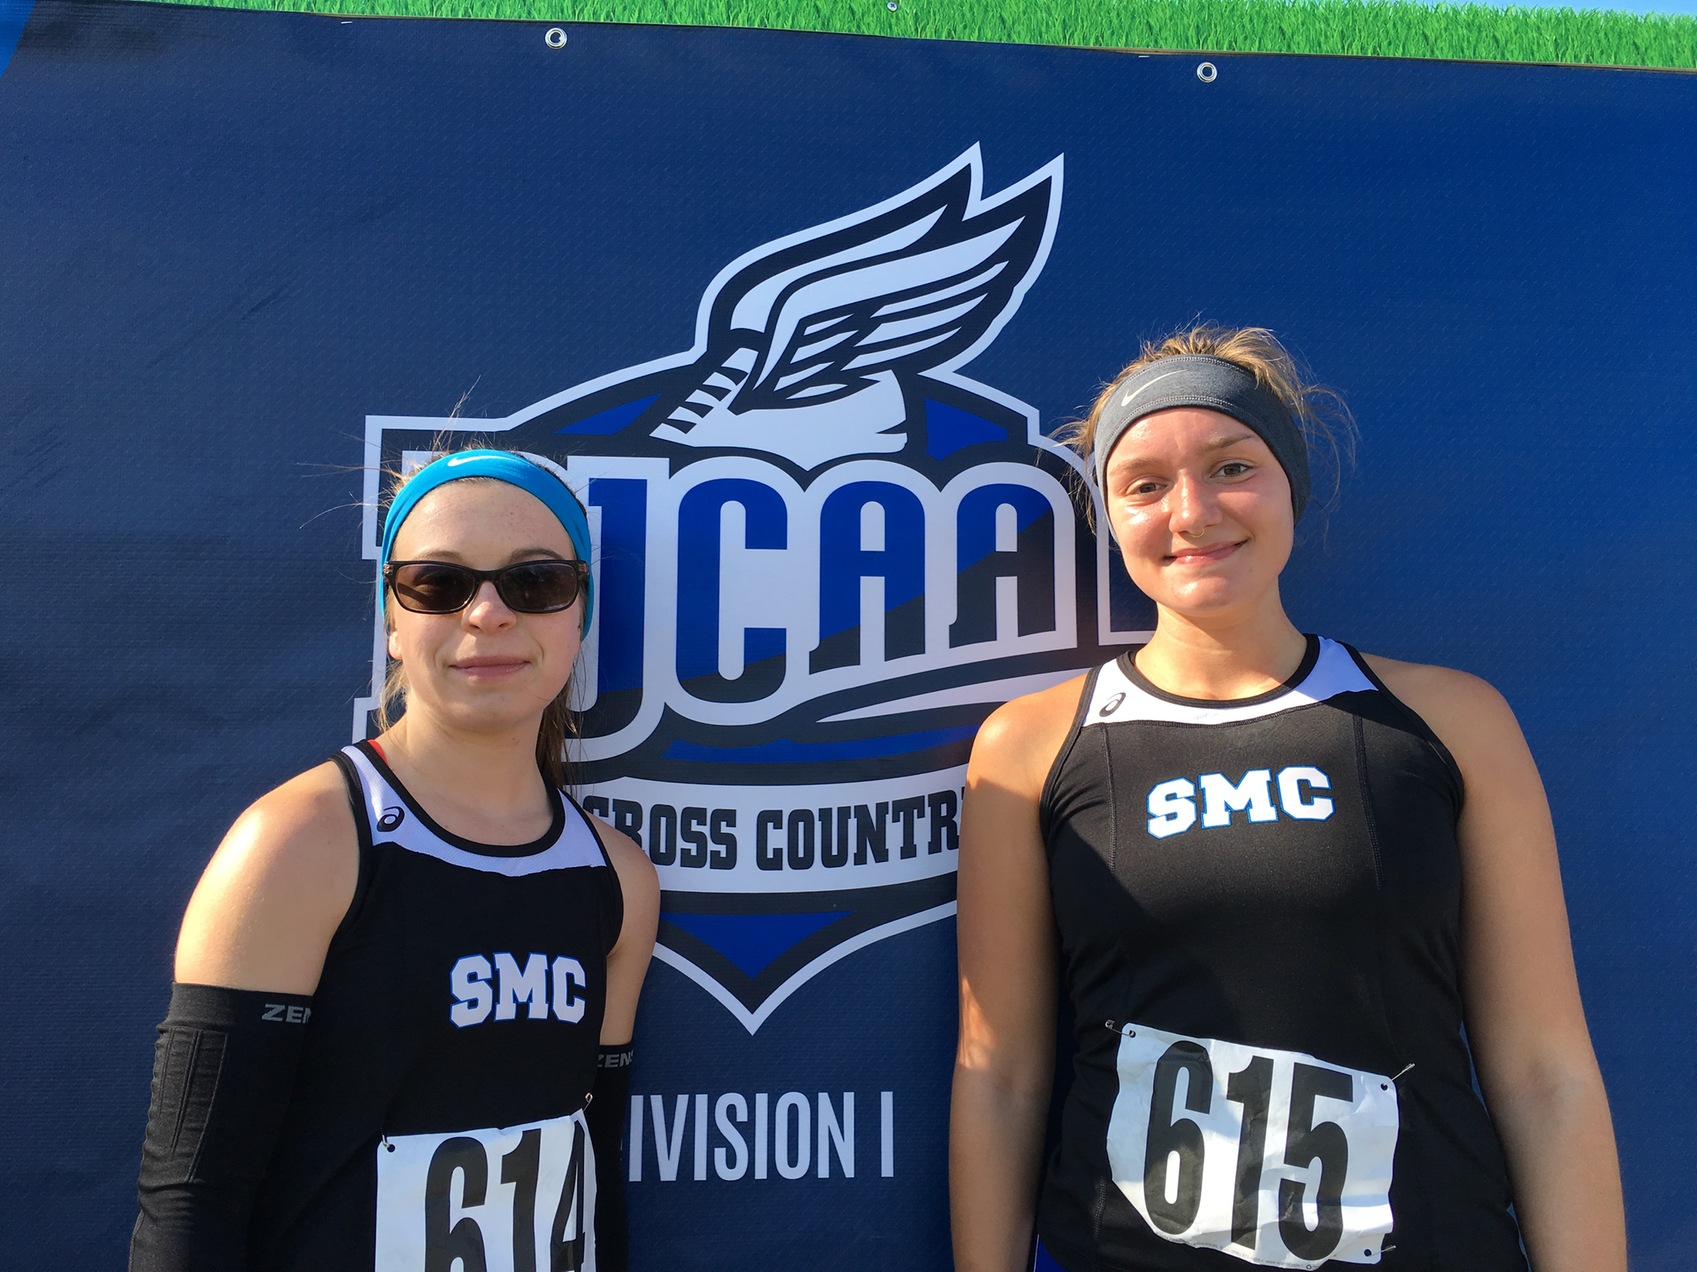 Pioneer Morgan Kitts and Madison Chesney race at 2018 NJCAA Div. I XC Nationals